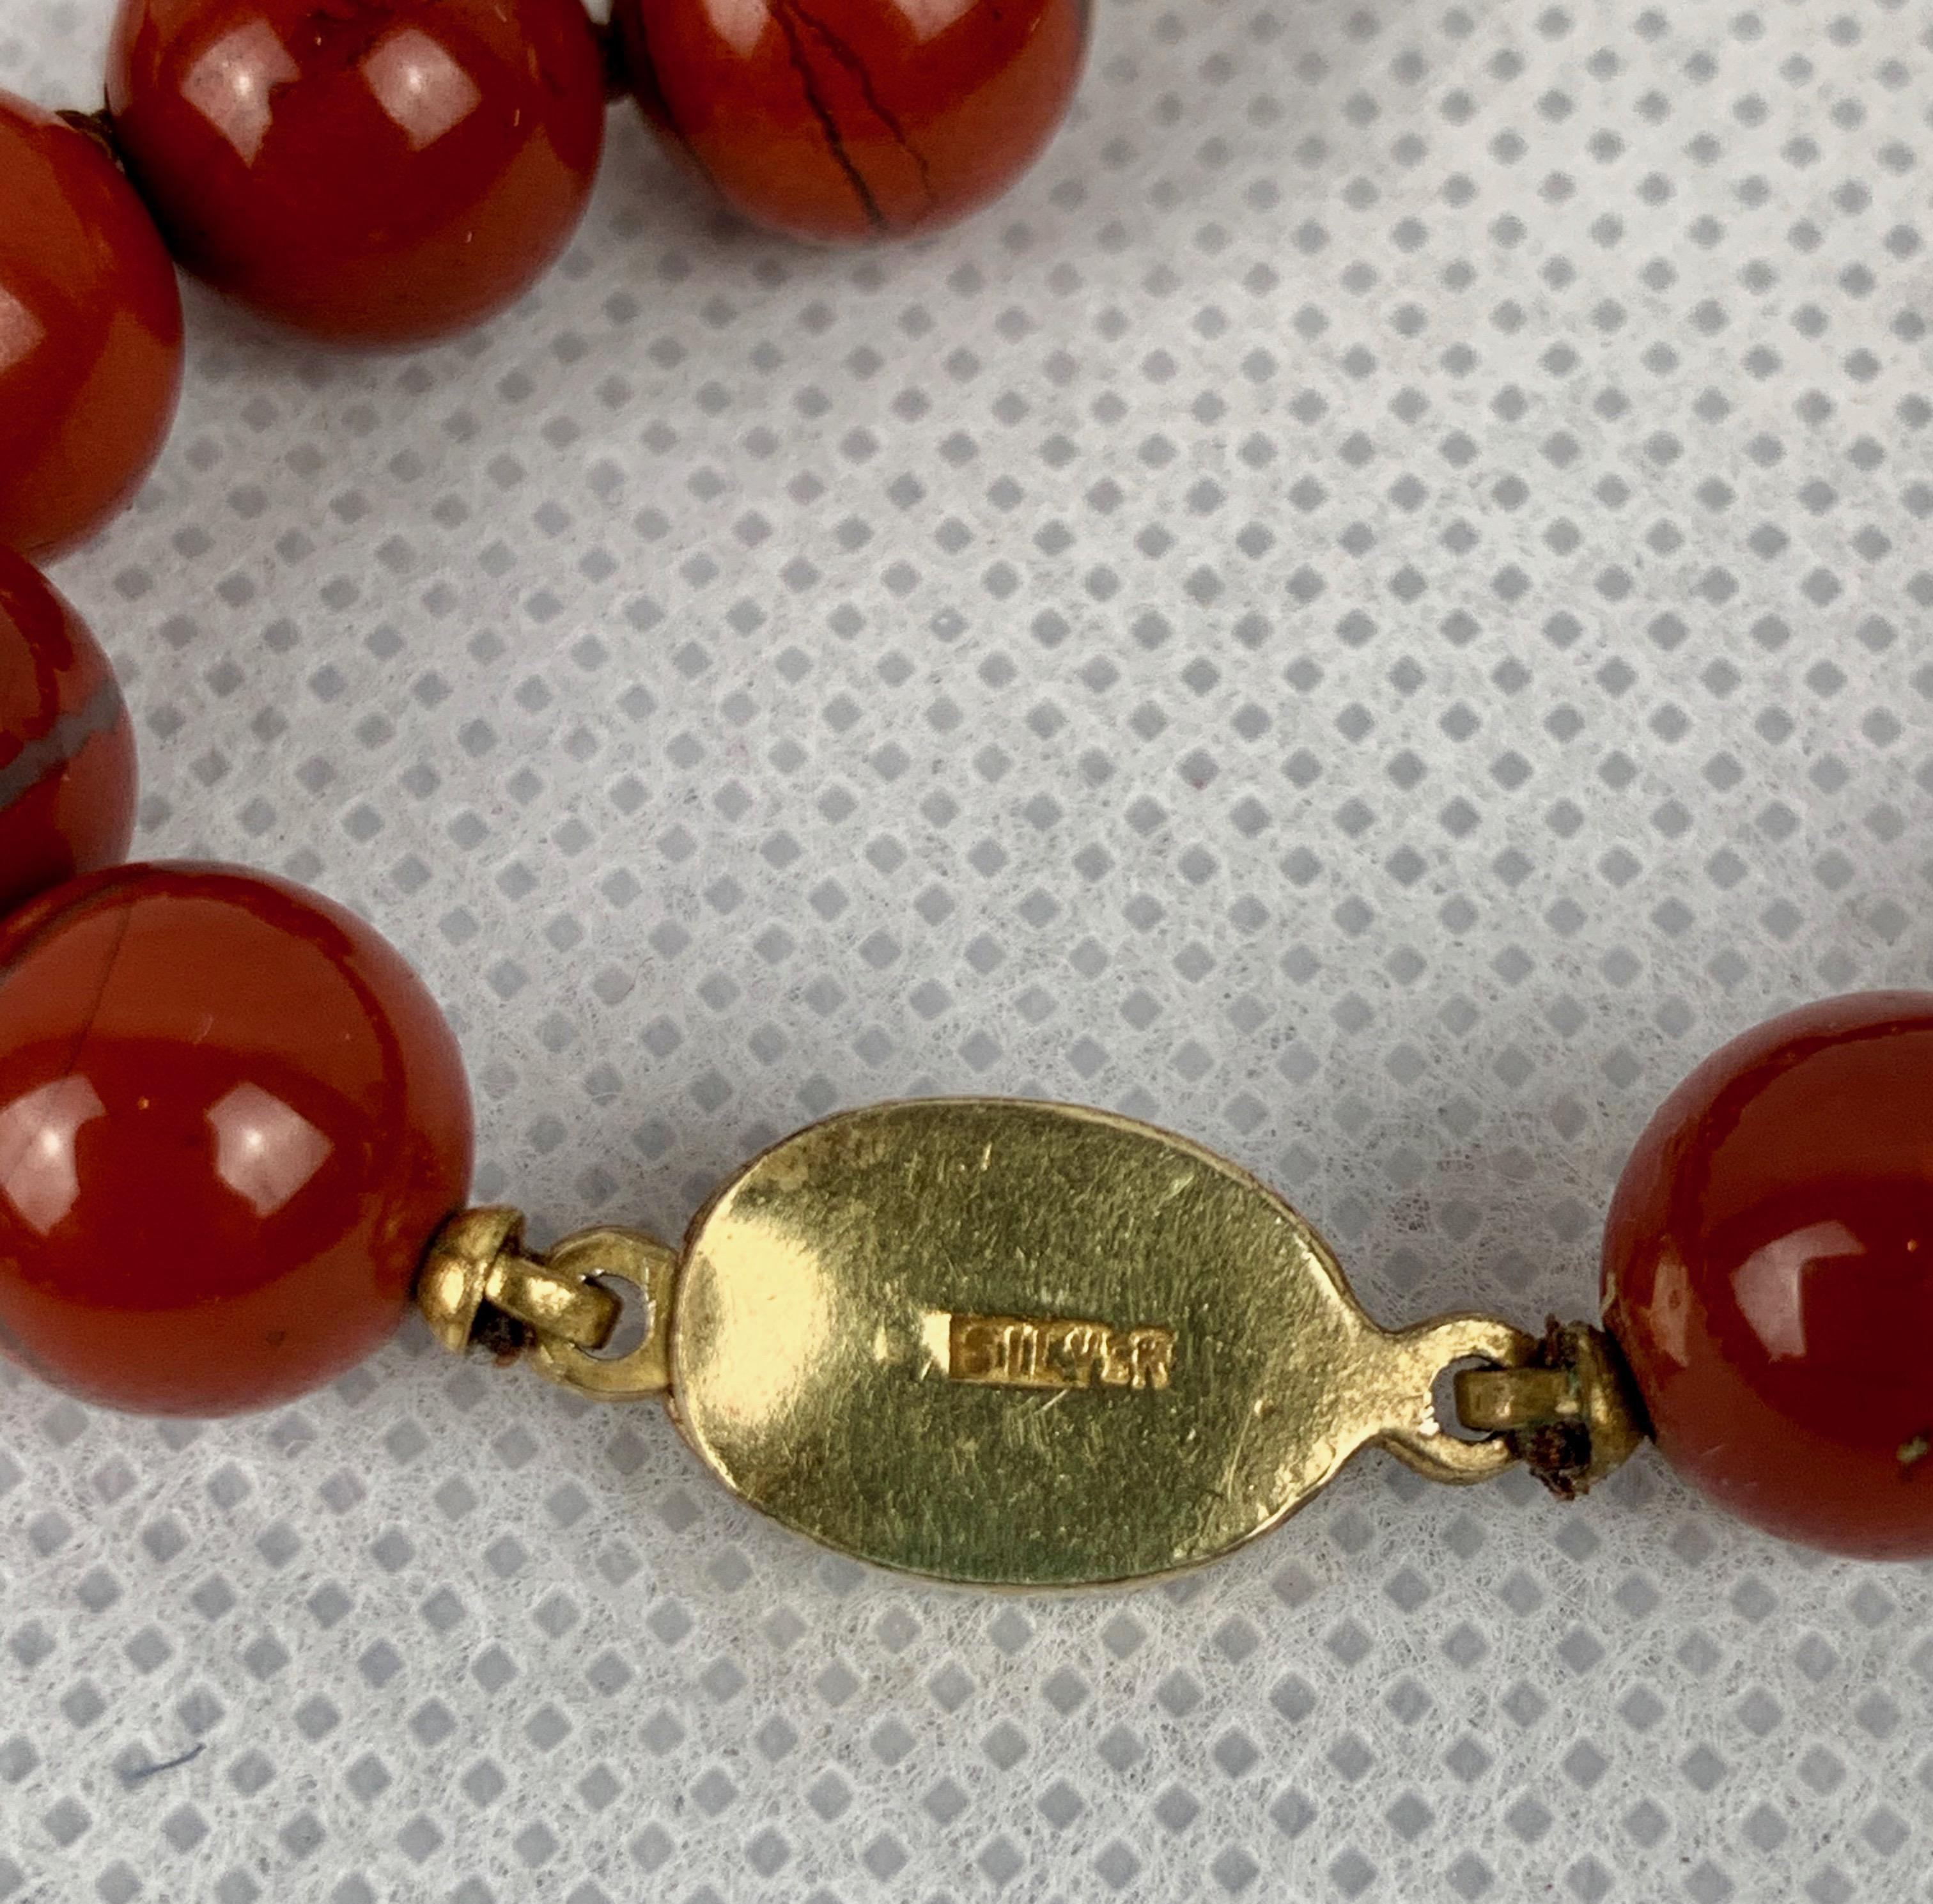 Contemporary  Matched Red Jasper Bead Necklace with 14 Karat Gold Spacers- 31